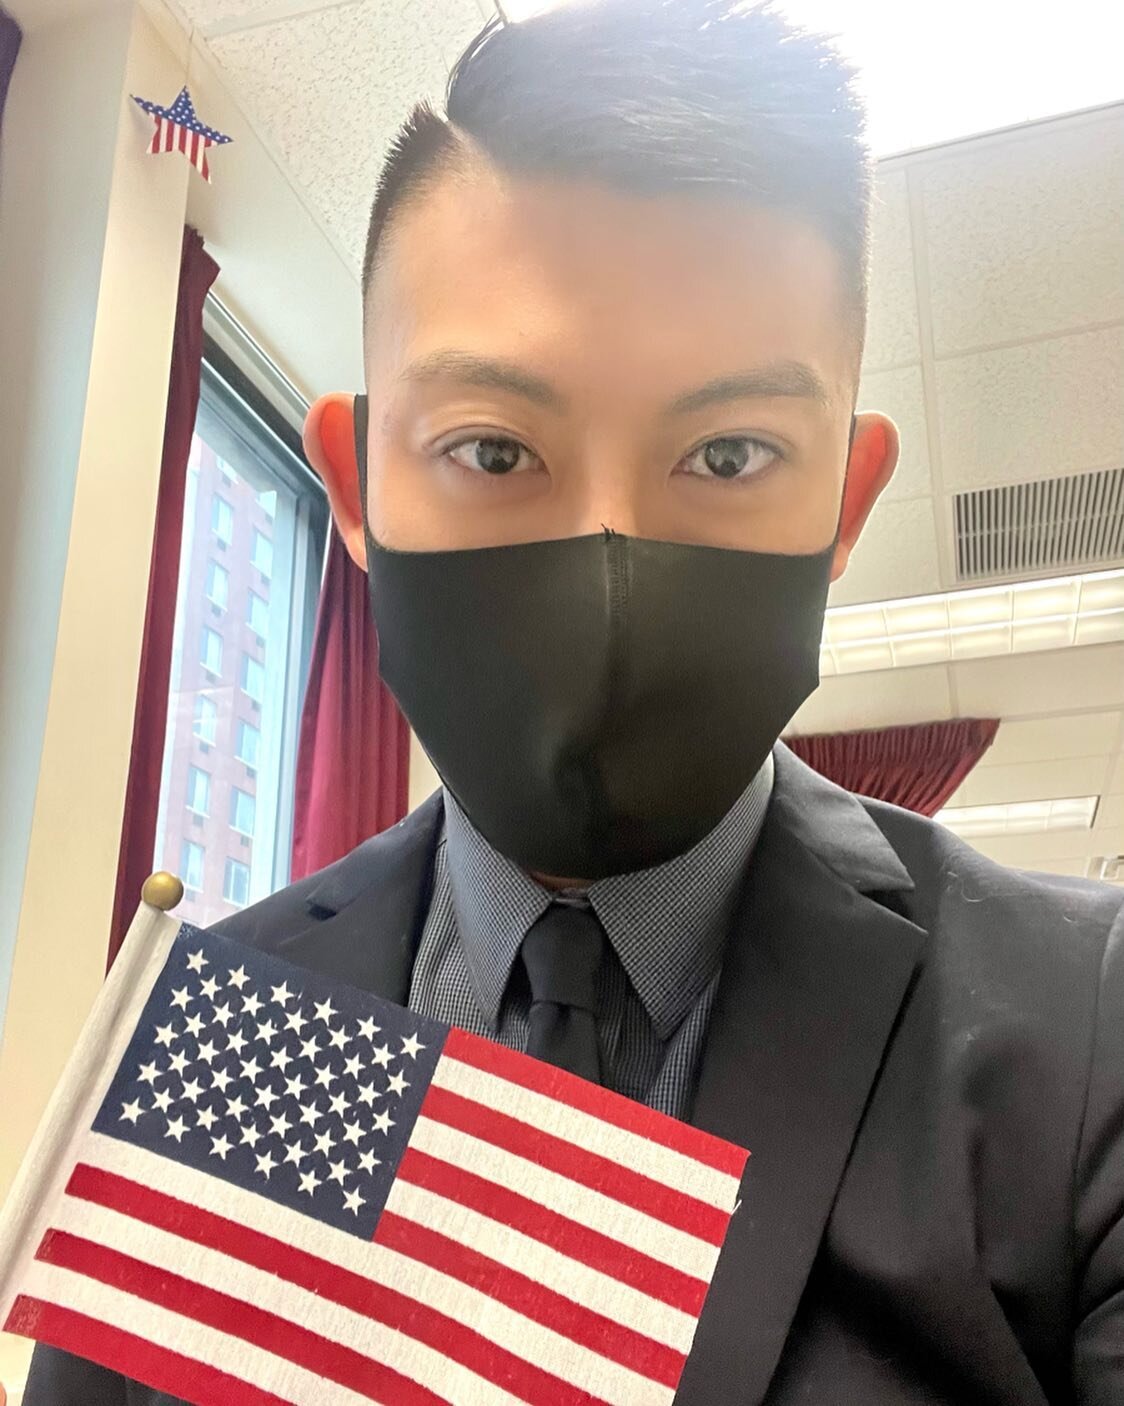 🎂 This year&rsquo;s birthday is extra special because after 18 years in NYC, I&rsquo;m officially an American Citizen! 🇺🇸 Asian-Canadian-American, to be exact 🇭🇰 🇨🇦 🇺🇸. This country is indeed the land of dreams, and my life has surpassed eve